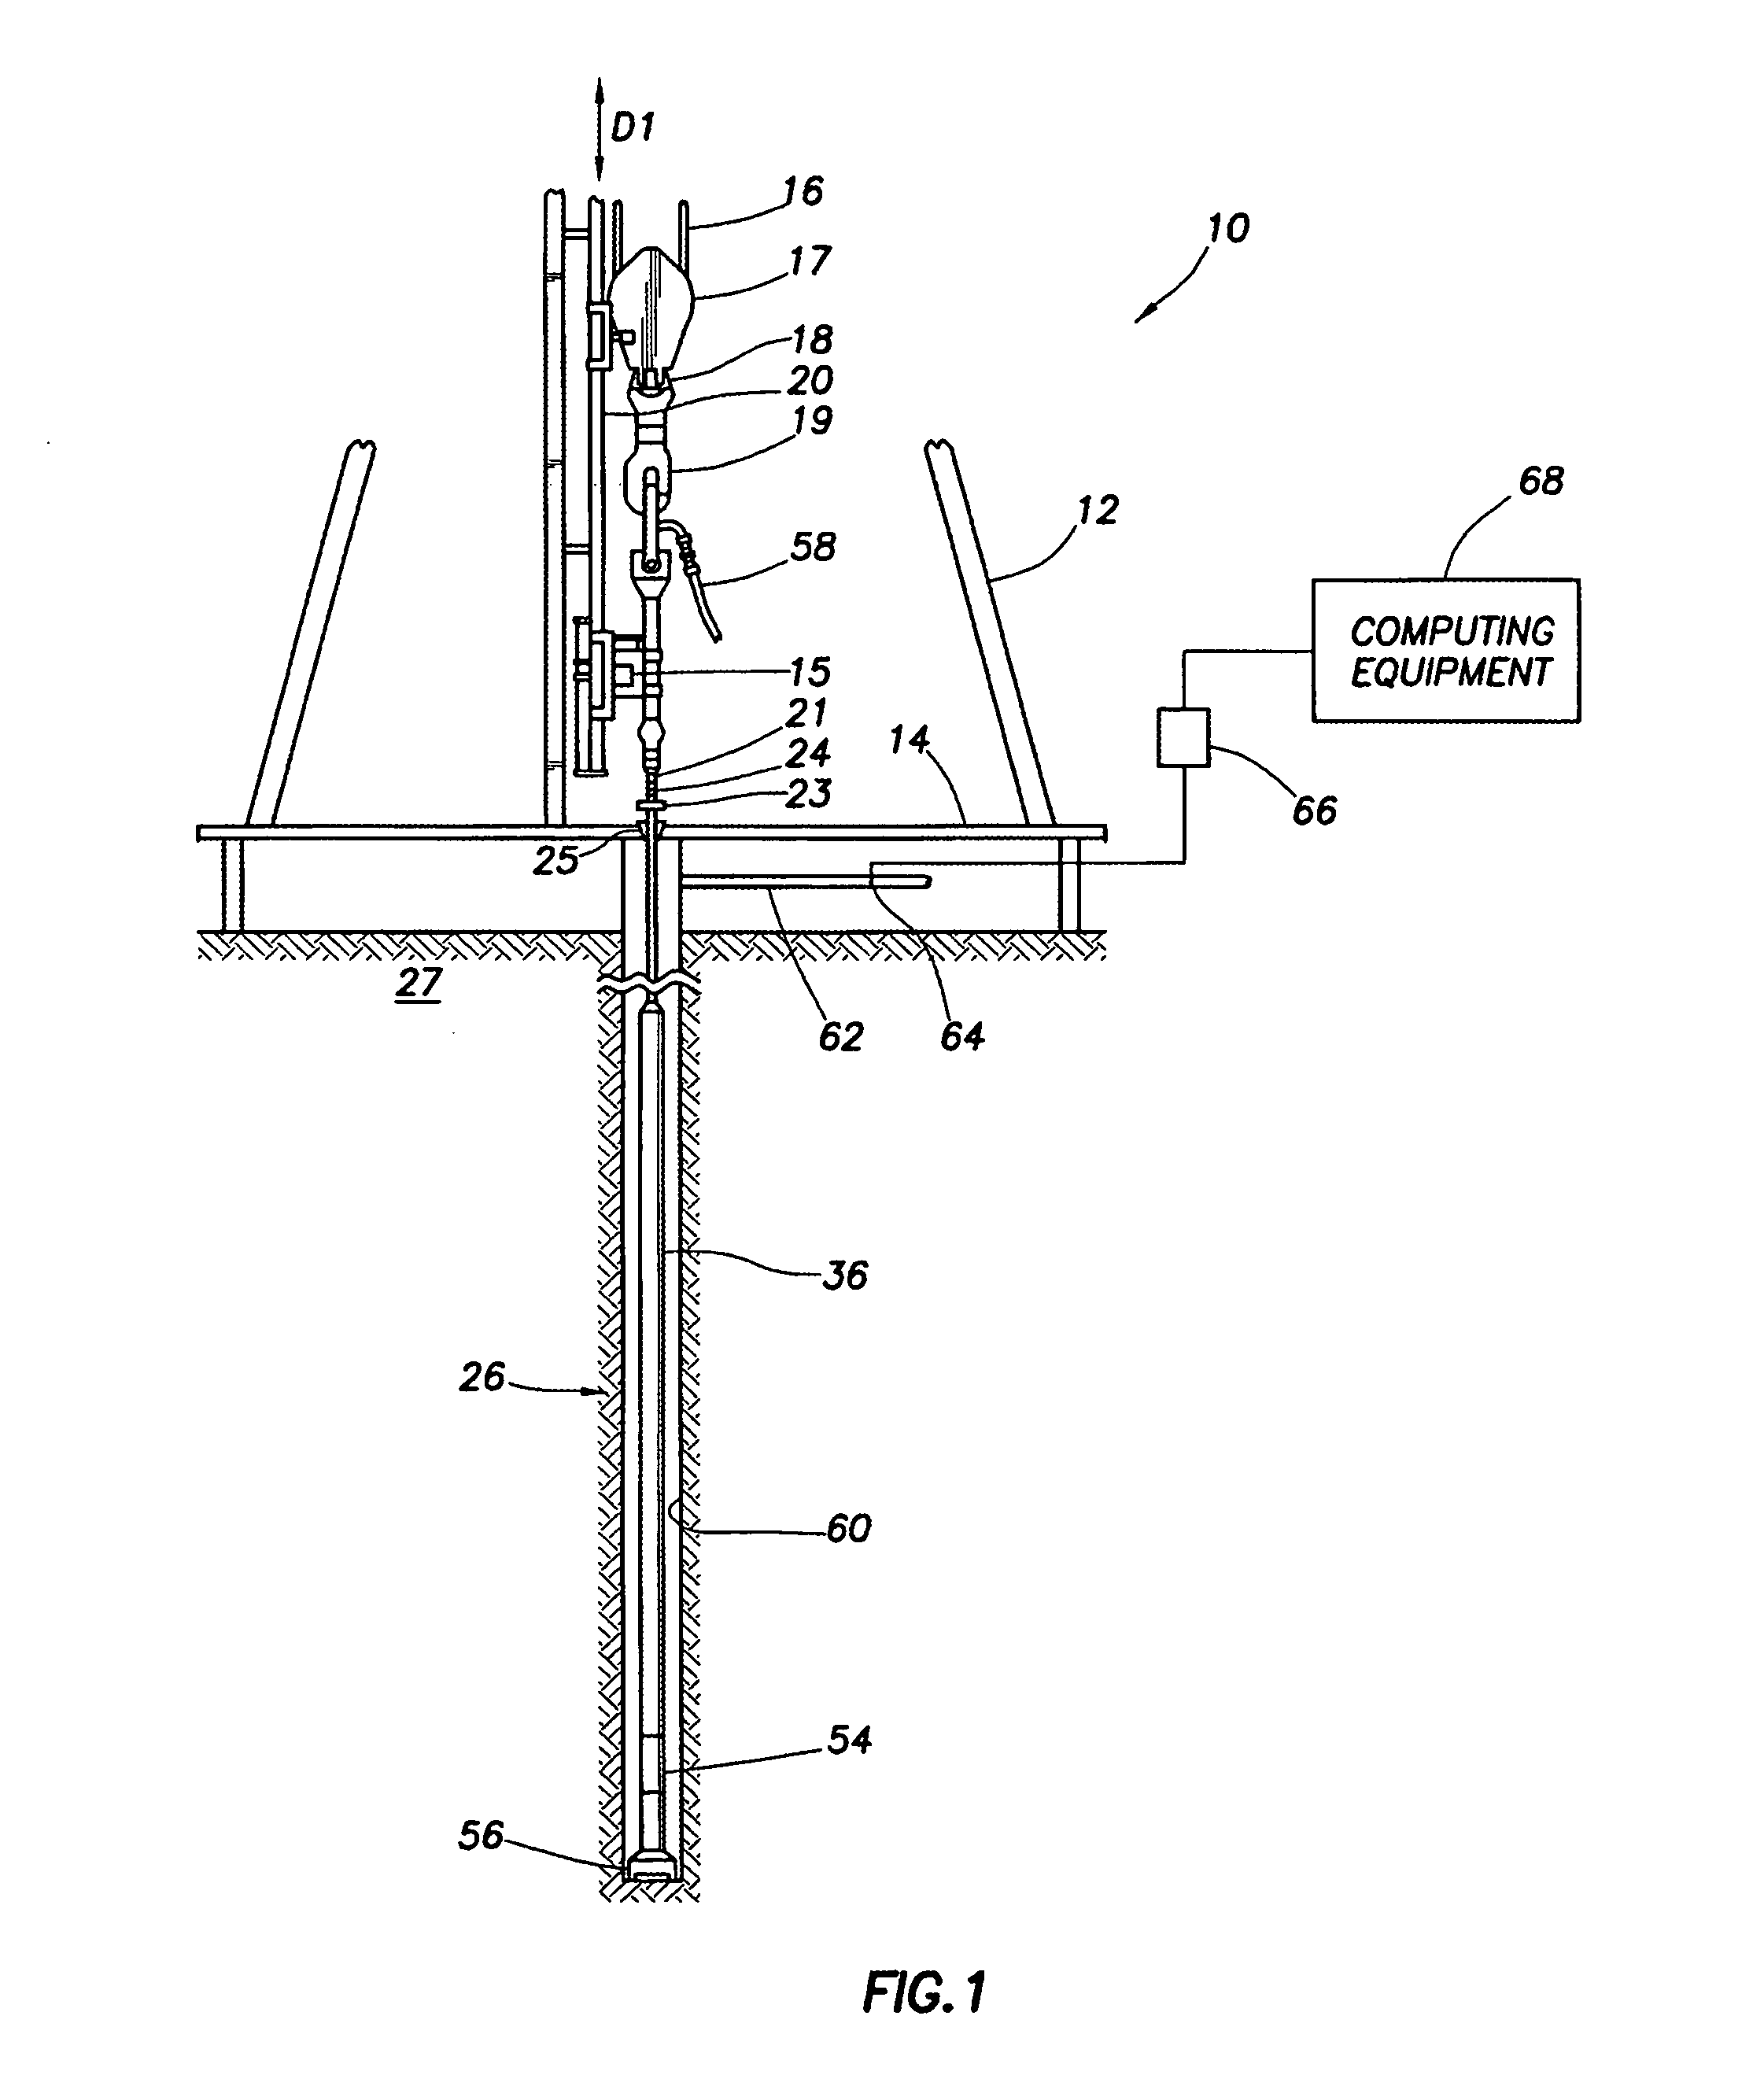 Drill string incorporating an acoustic telemetry system employing one or more low frequency acoustic attenuators and an associated method of transmitting data